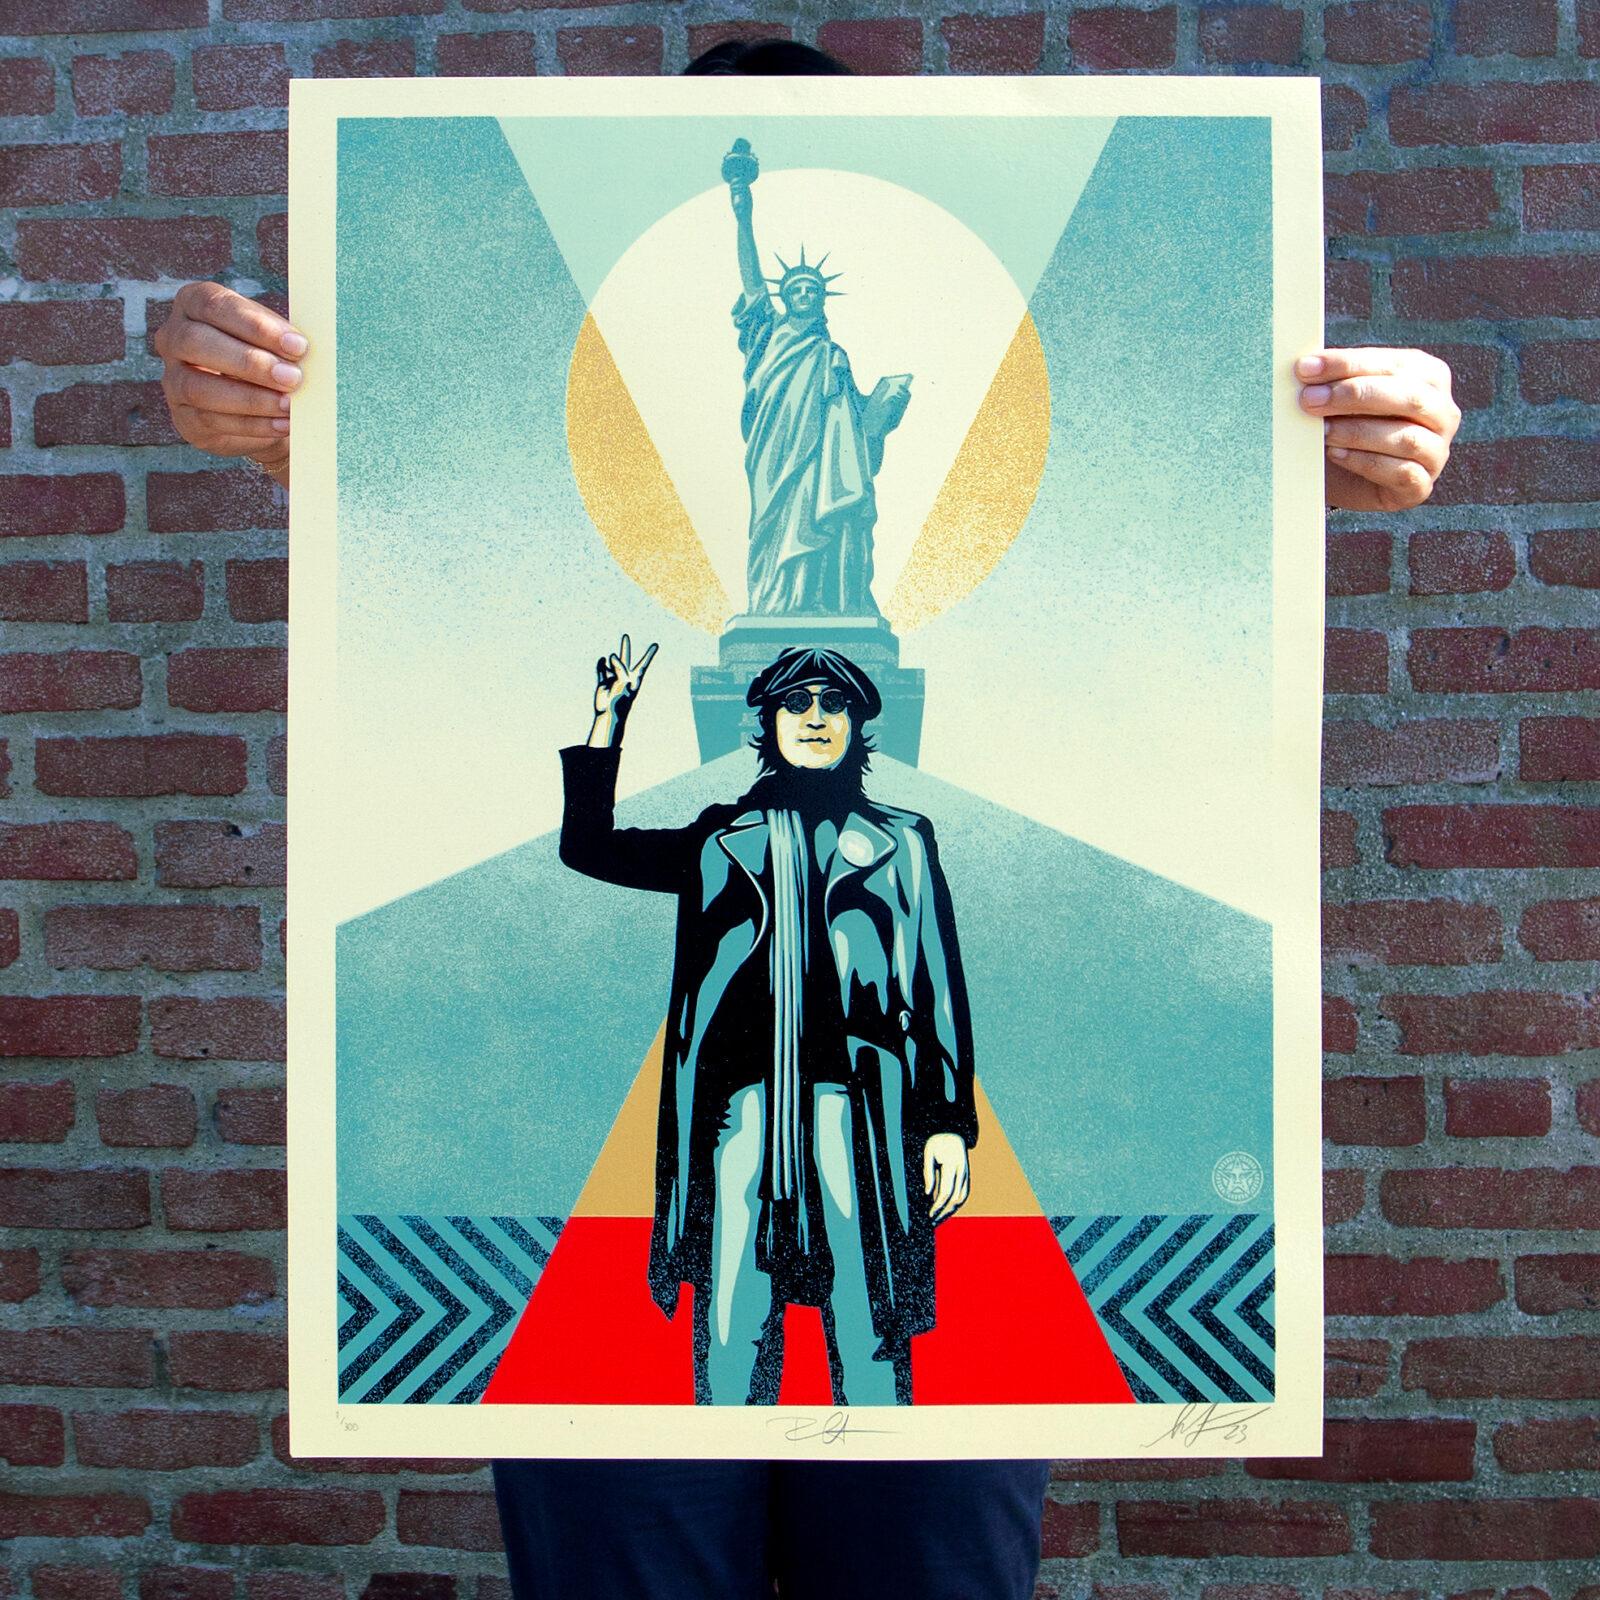 24" x 18" Unframed
Limited Edition Screen Print on Thick Cream Speckletone Paper of 300
Hand Signed by Shepard Fairey and Bob Gruen

